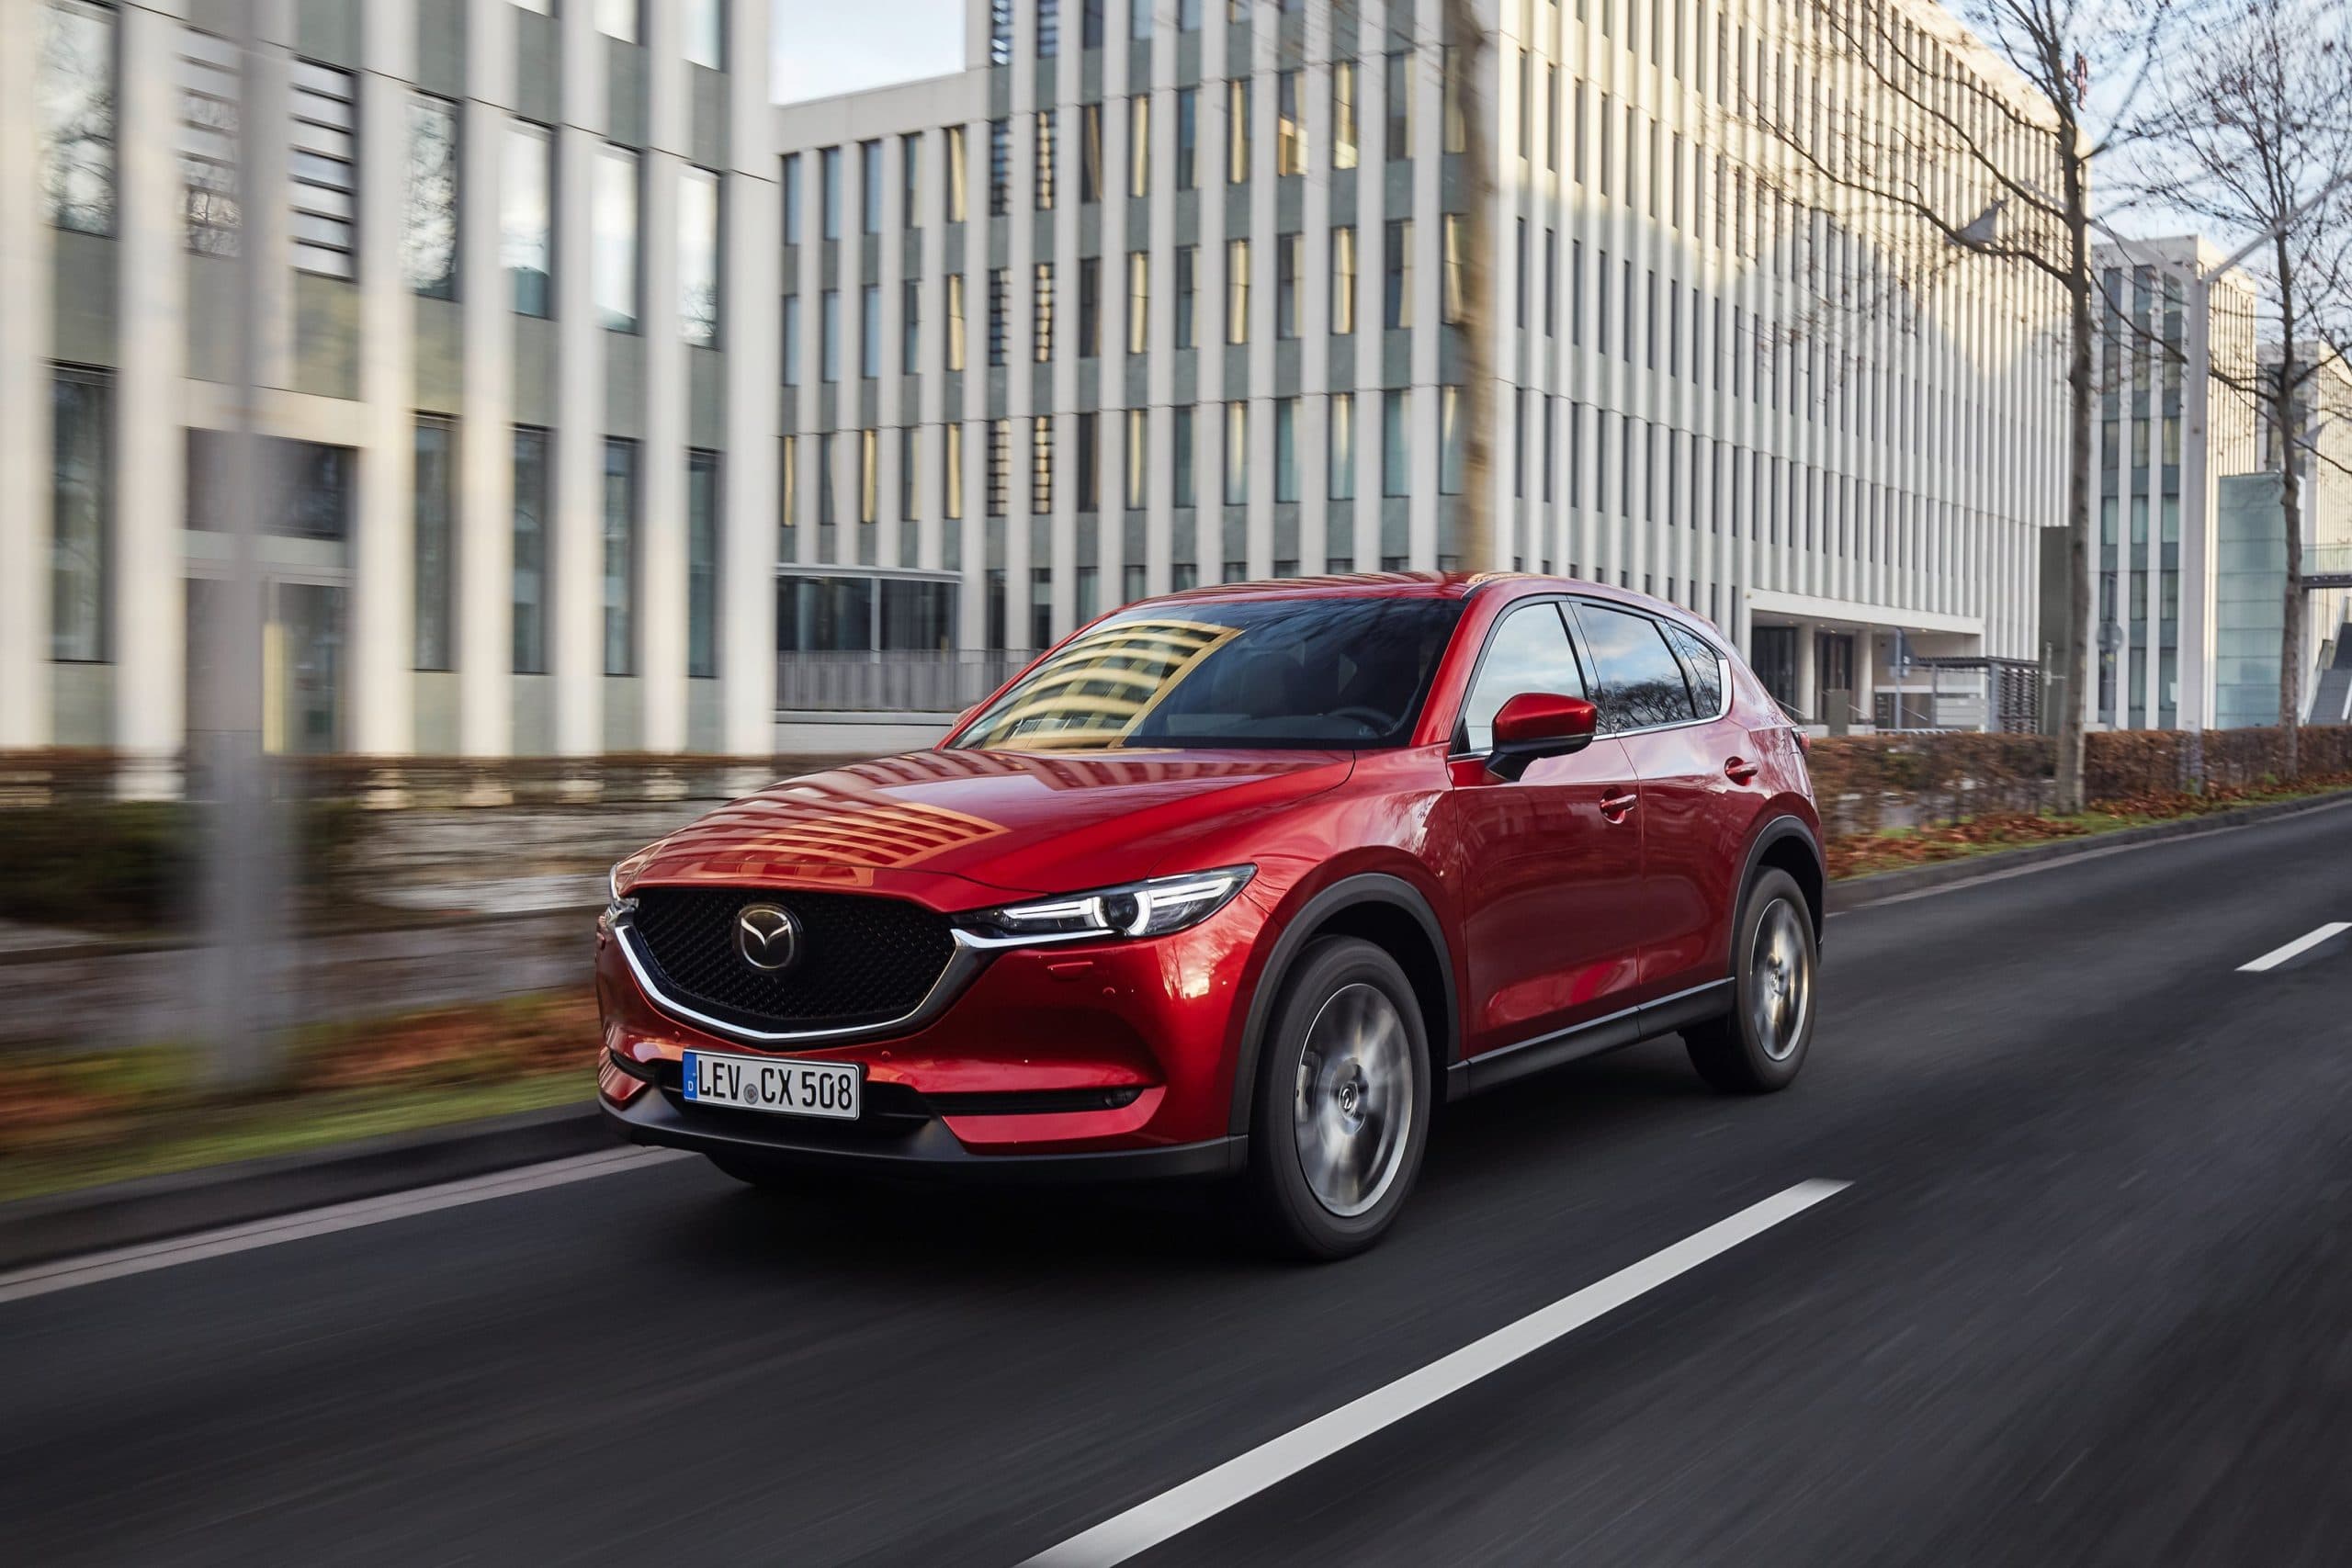 2021 Mazda CX 5 Soul Red Crystal Action 21 scaled Οι Γερμανοί διαπίστωσαν ότι το Mazda CX-5 "δε σπάει-δε χαλάει"